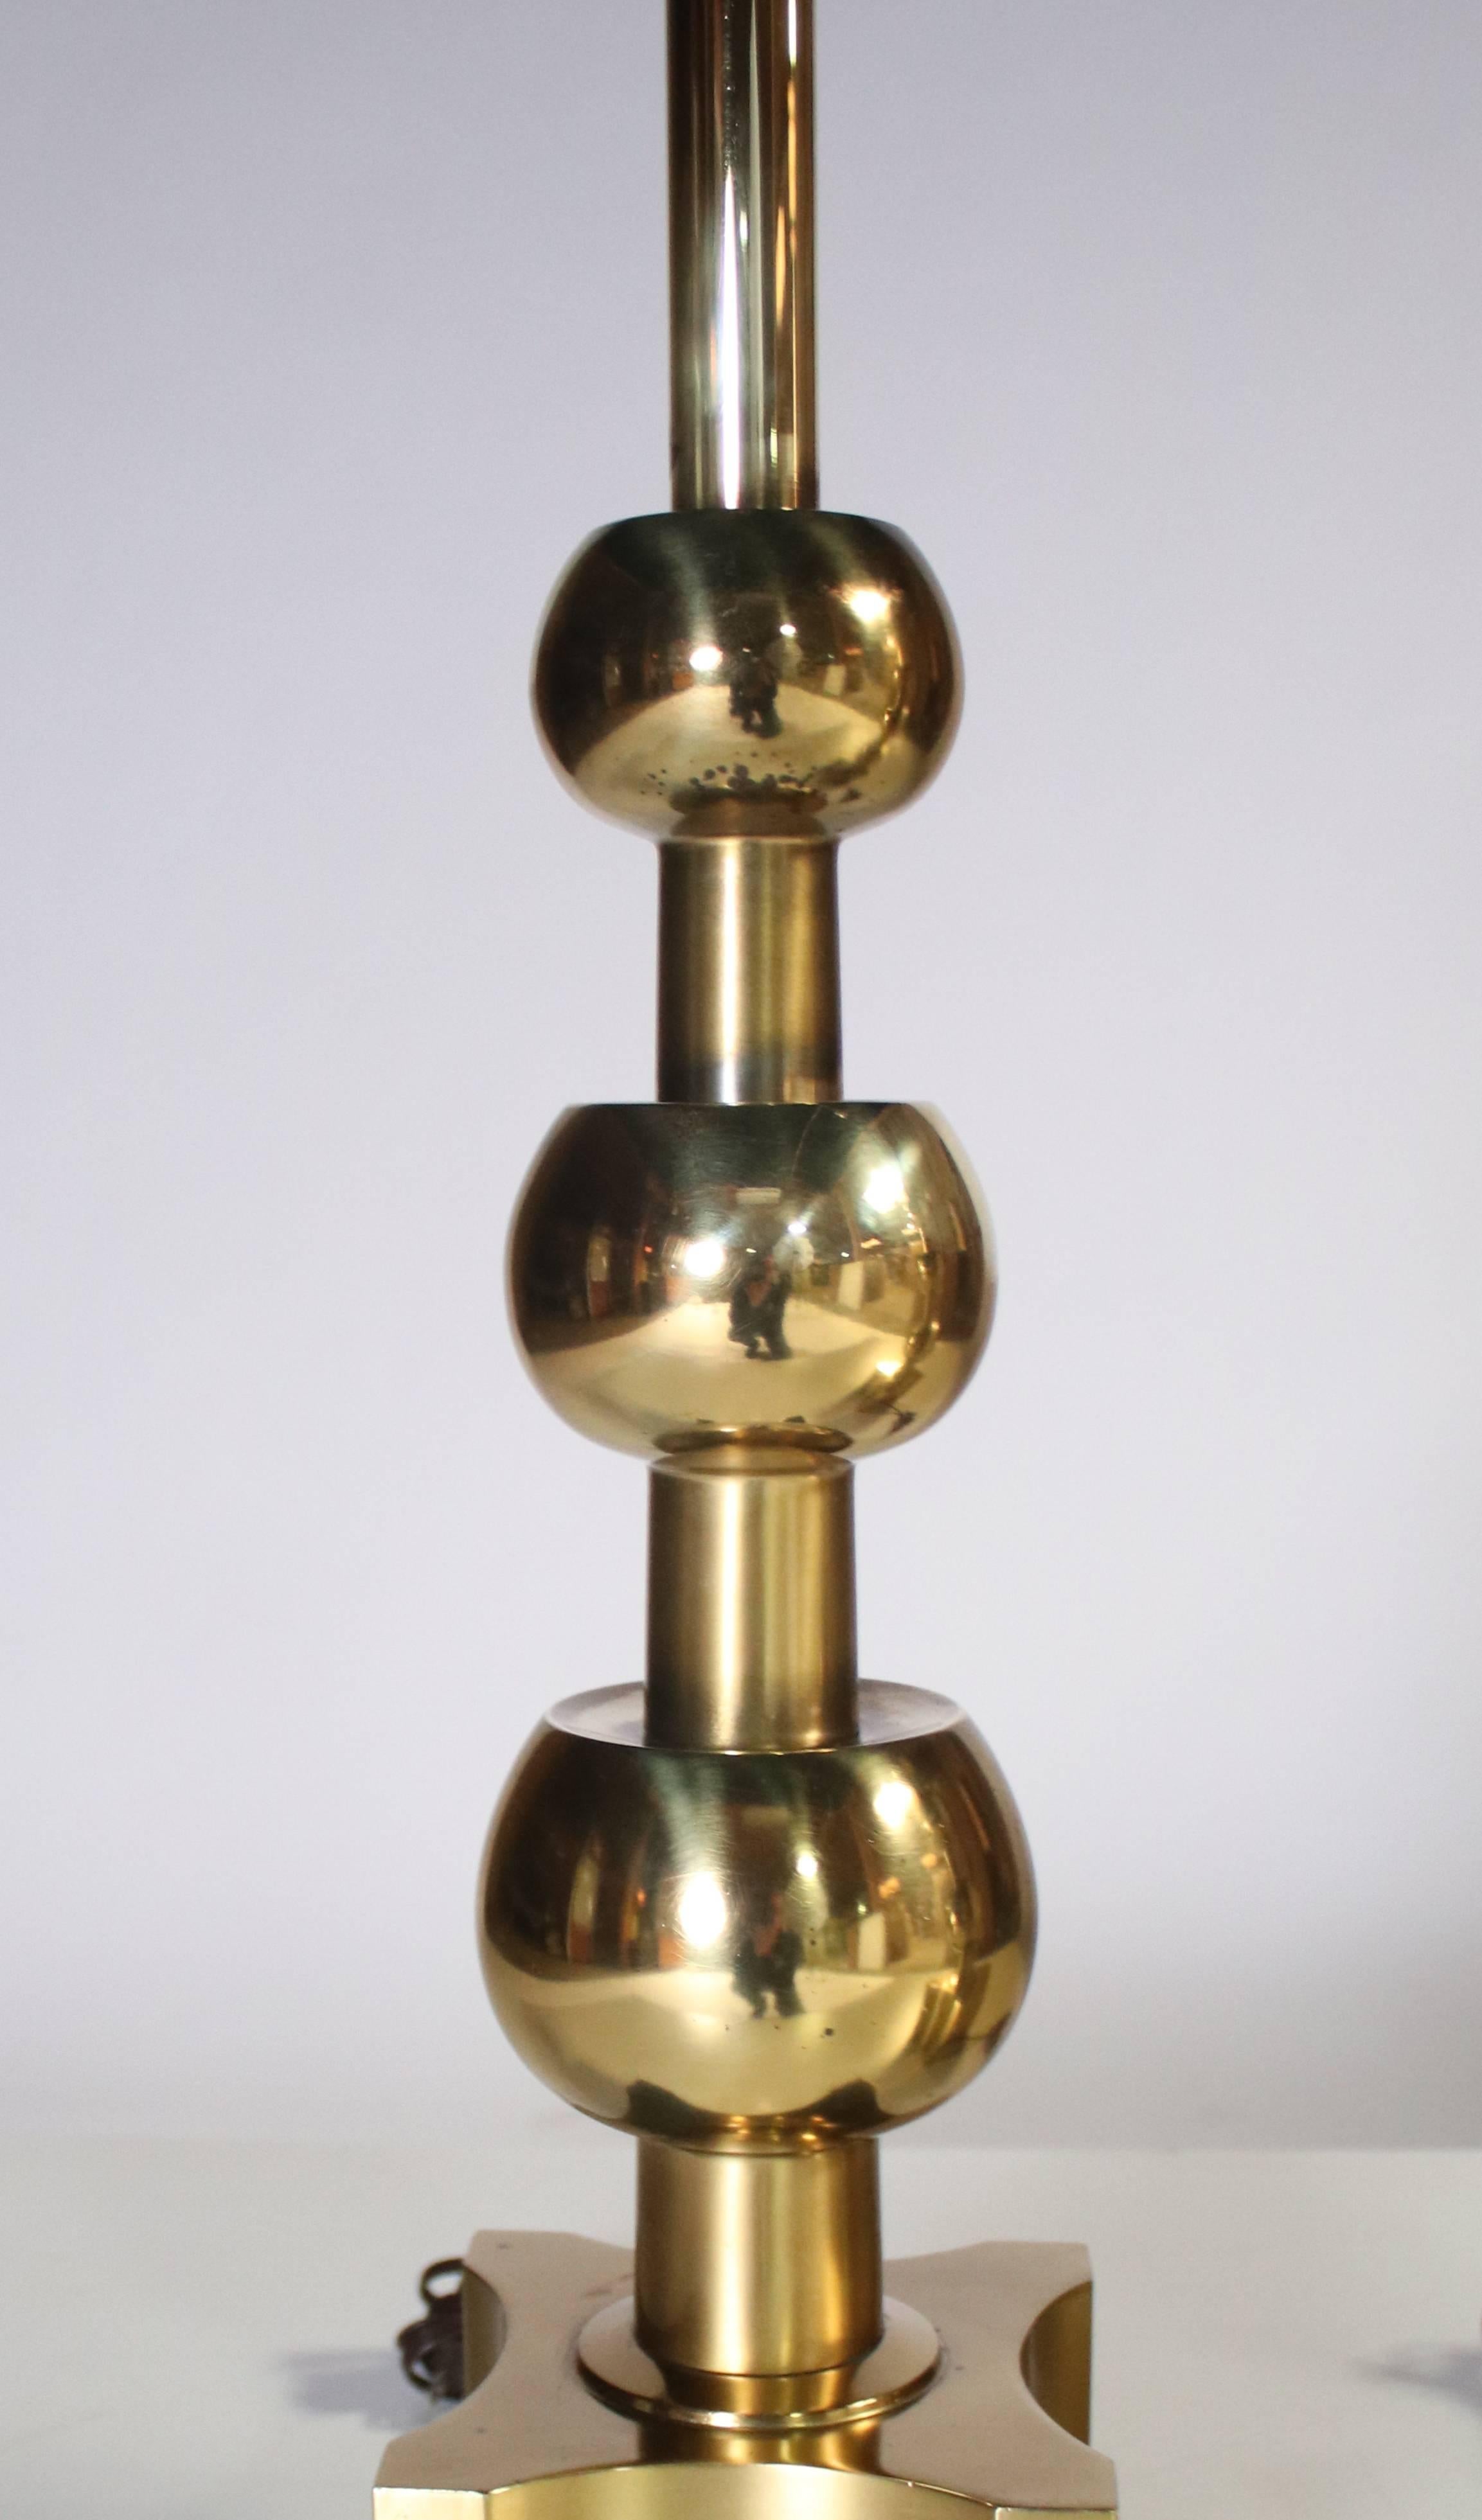 Pair of brass "stacked orb" or "graduated ball" table lamps in the style of Tommi Parzinger for Stiffel, Labelled. Wired and in working condition. These lamps have been polished to a clean shine.